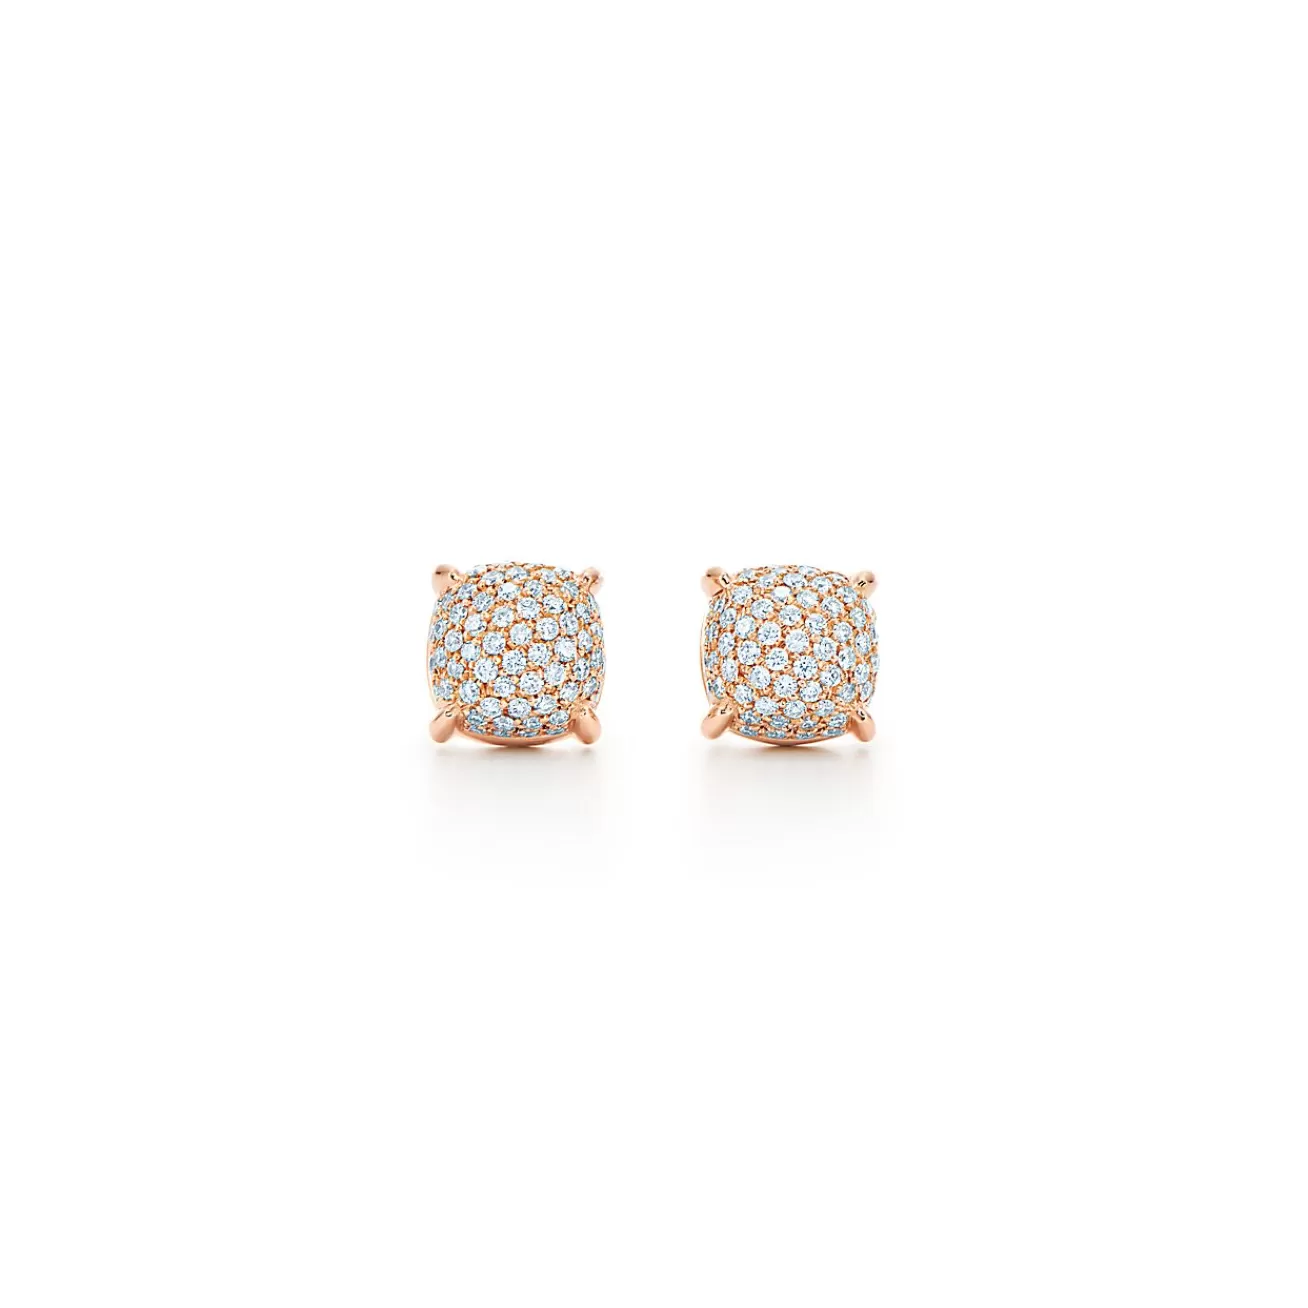 Tiffany & Co. Paloma's Sugar Stacks earrings in 18k rose gold with diamonds. | ^ Earrings | Rose Gold Jewelry